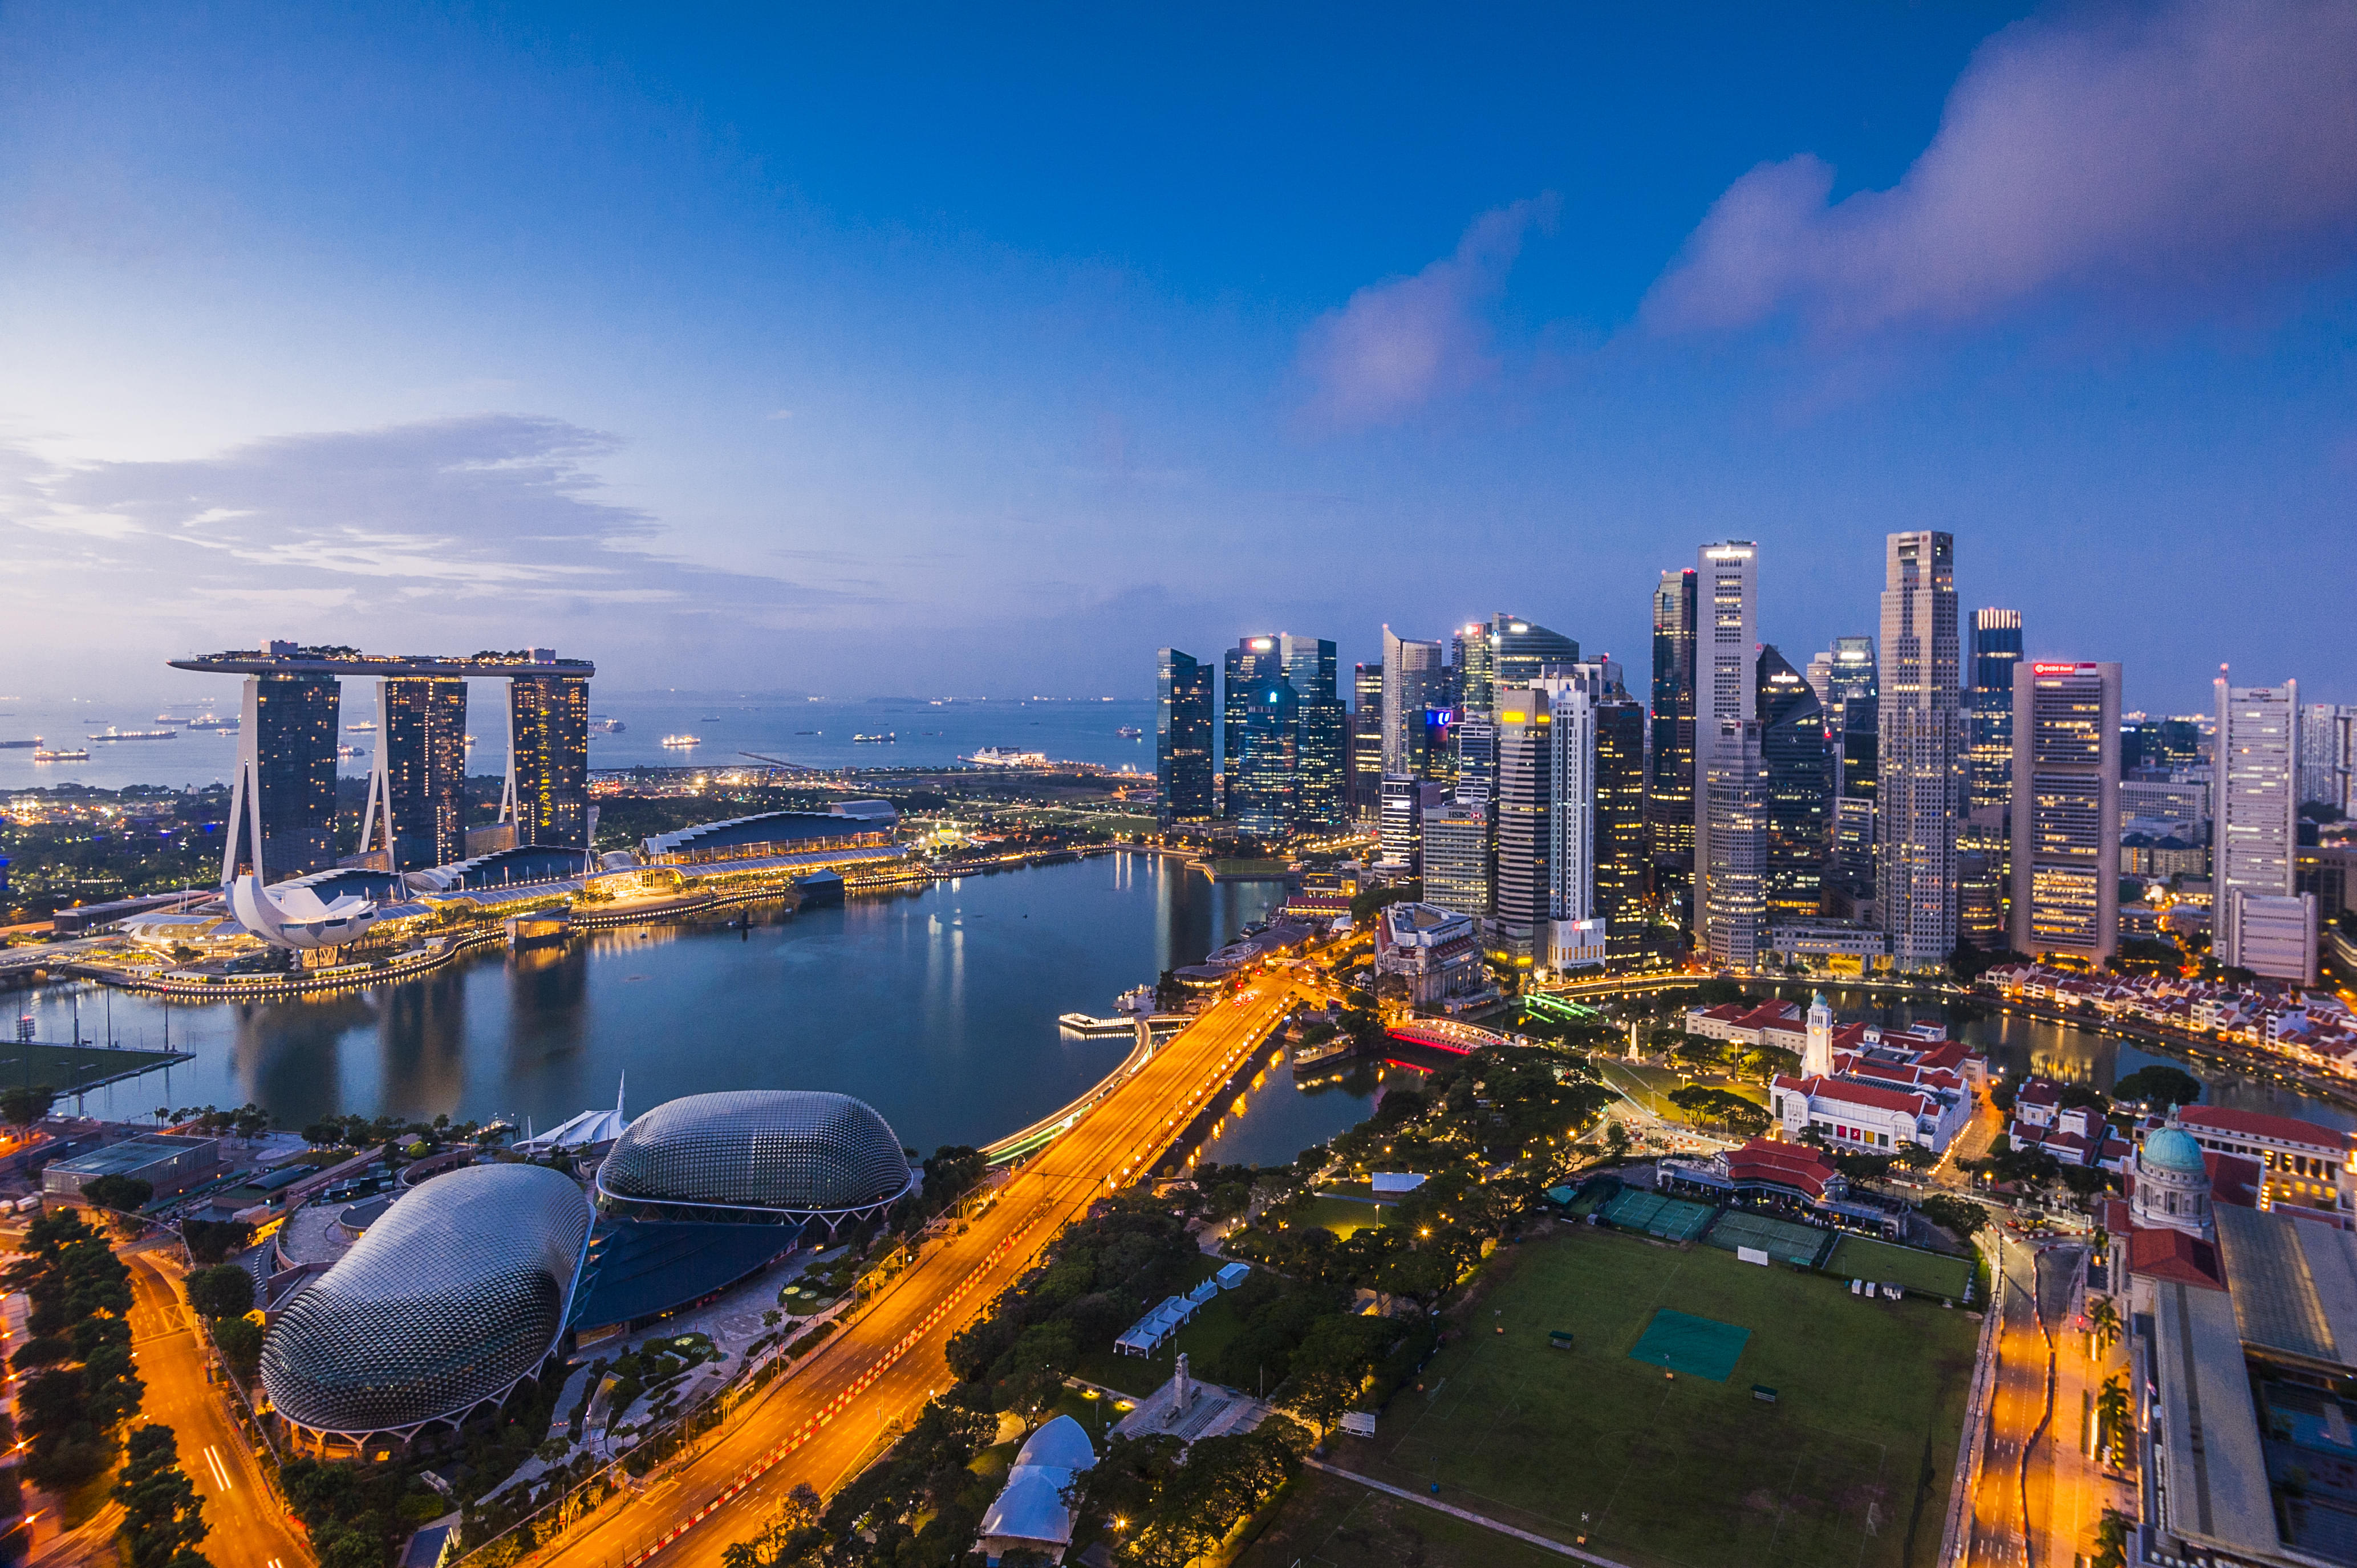 Aerial view of Singapore